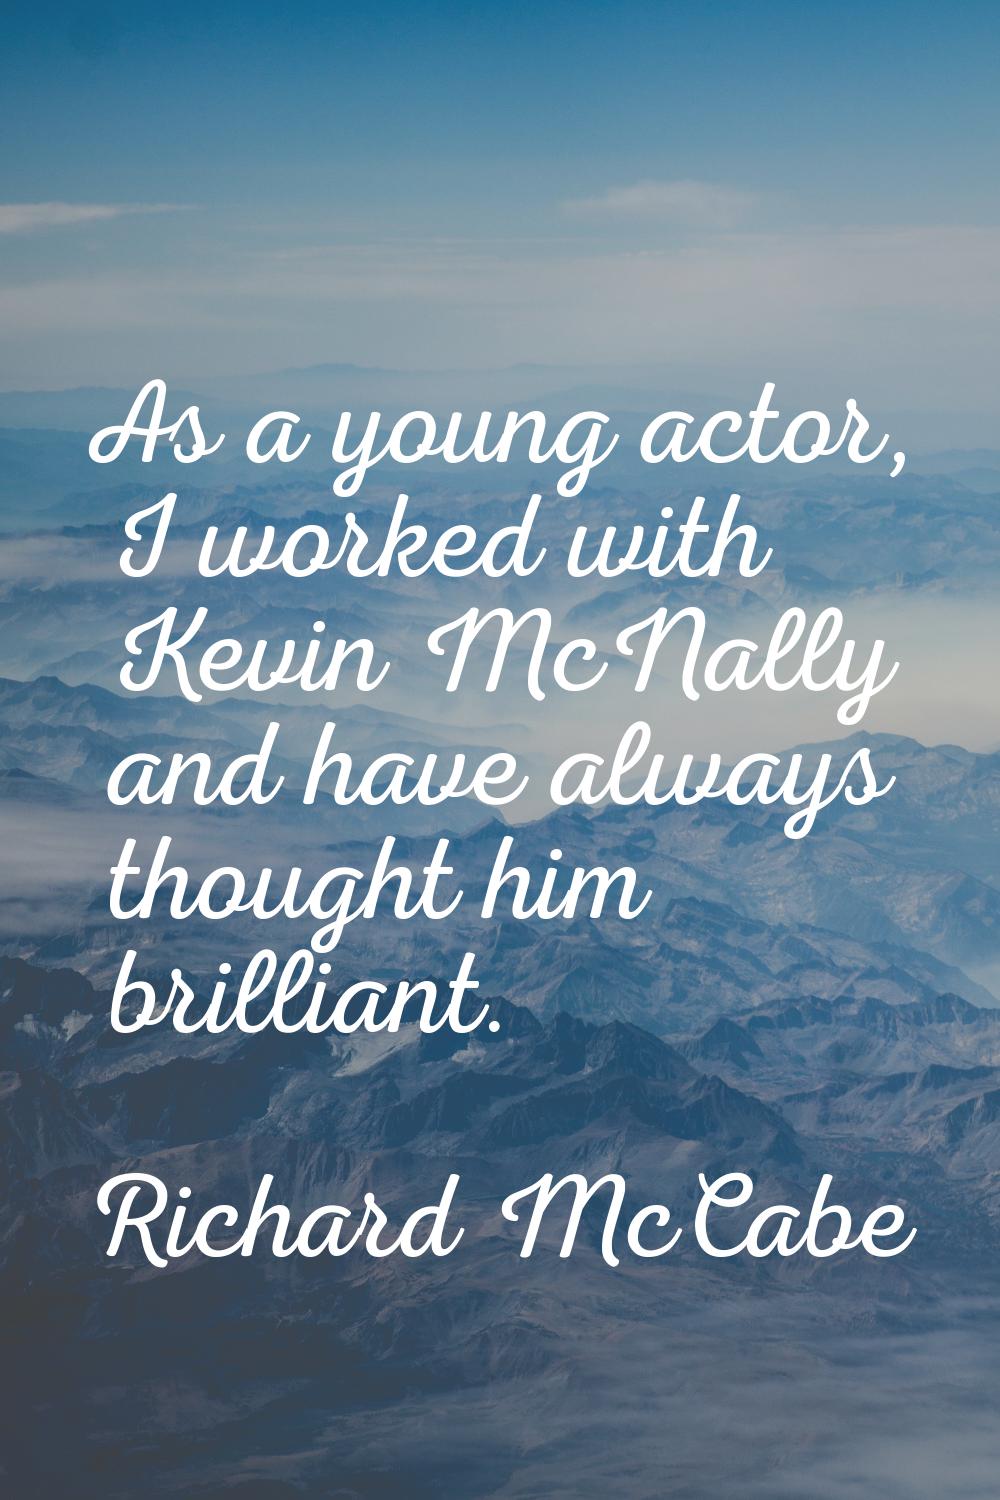 As a young actor, I worked with Kevin McNally and have always thought him brilliant.